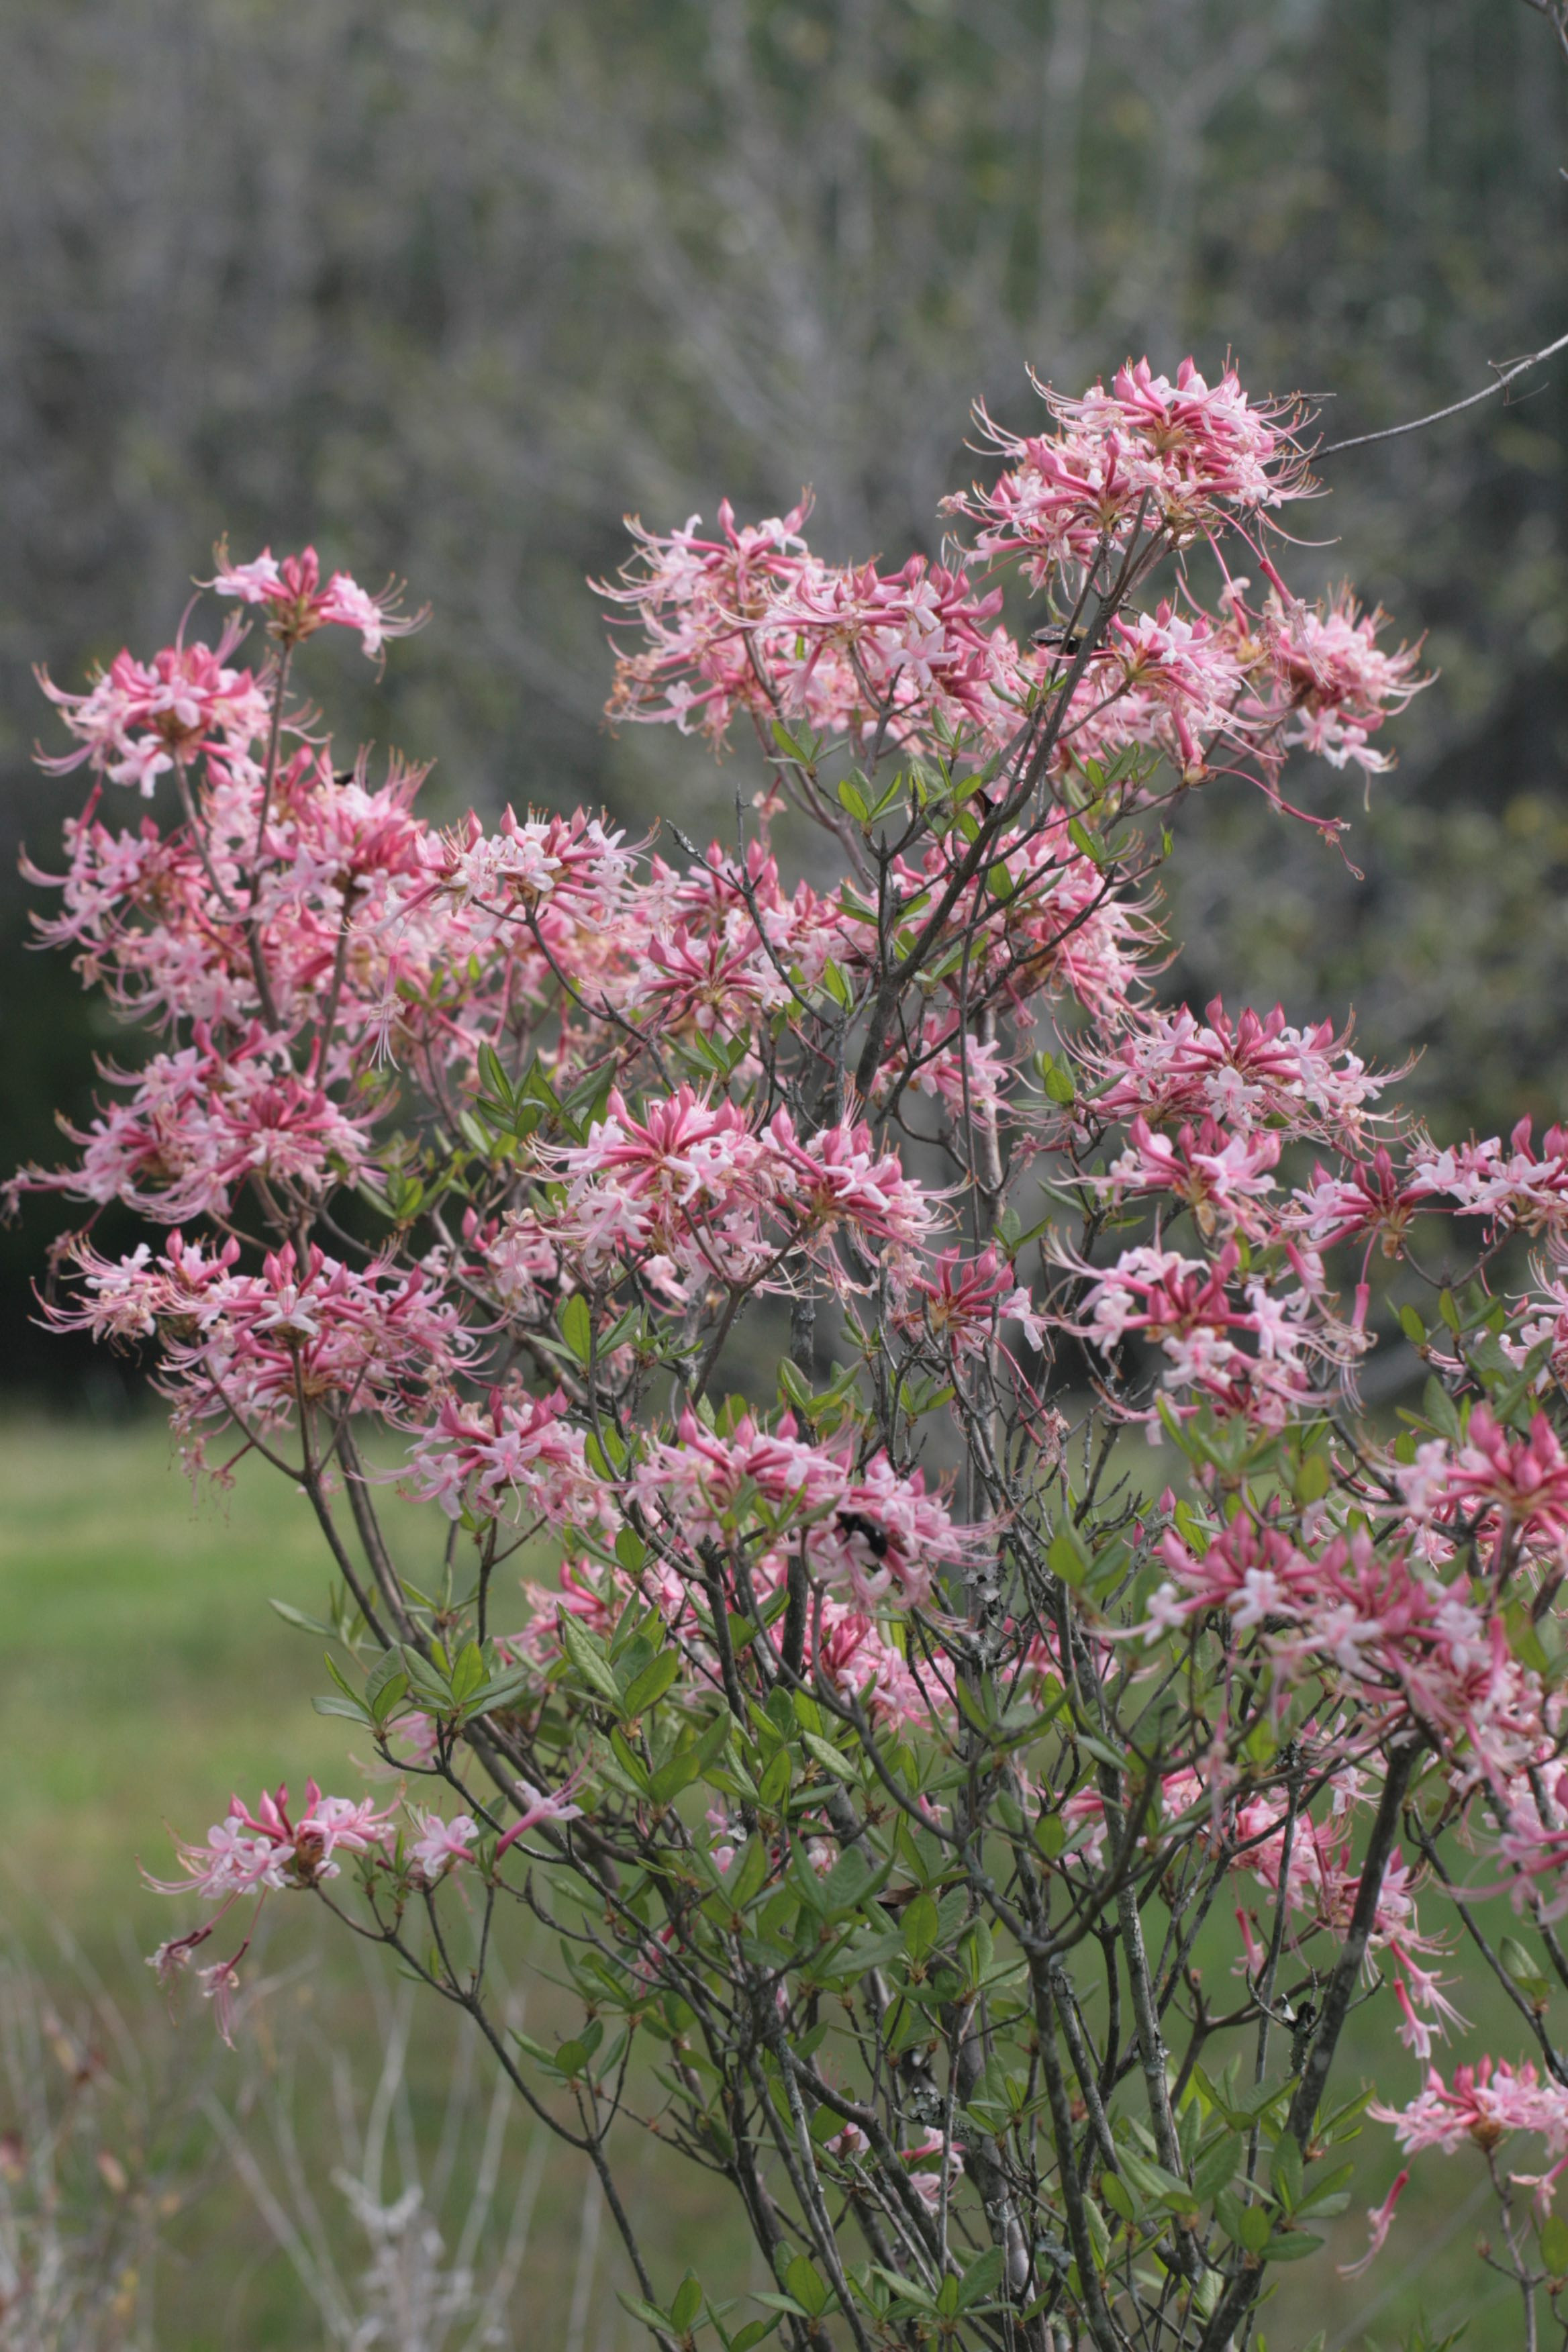 The Scientific Name is Rhododendron canescens. You will likely hear them called Piedmont Azalea, Southern Pinxter Azalea, Wild Azalea, Hoary Azalea, Mountain Azalea, Florida Pinxter Azalea. This picture shows the Medium-sized shrub of Rhododendron canescens